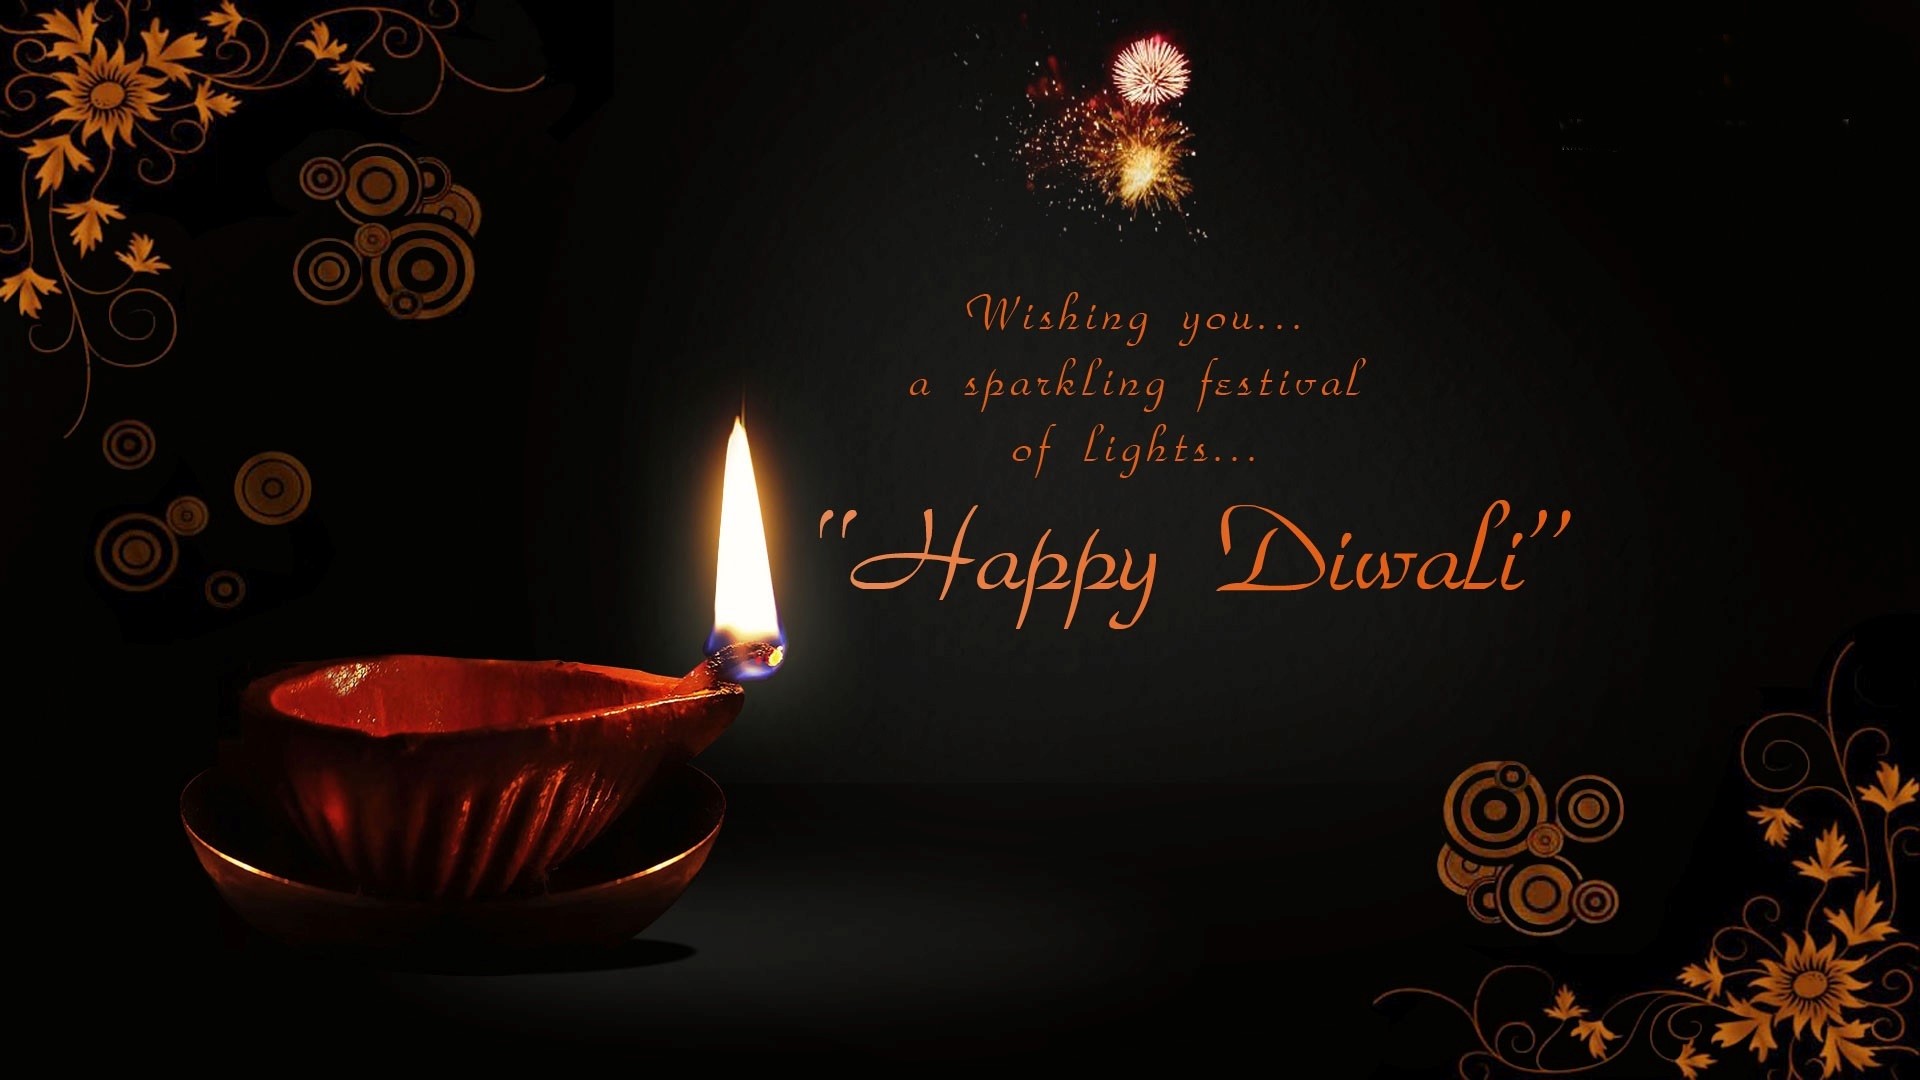 wishing you a sparkling festival of lights happy diwali